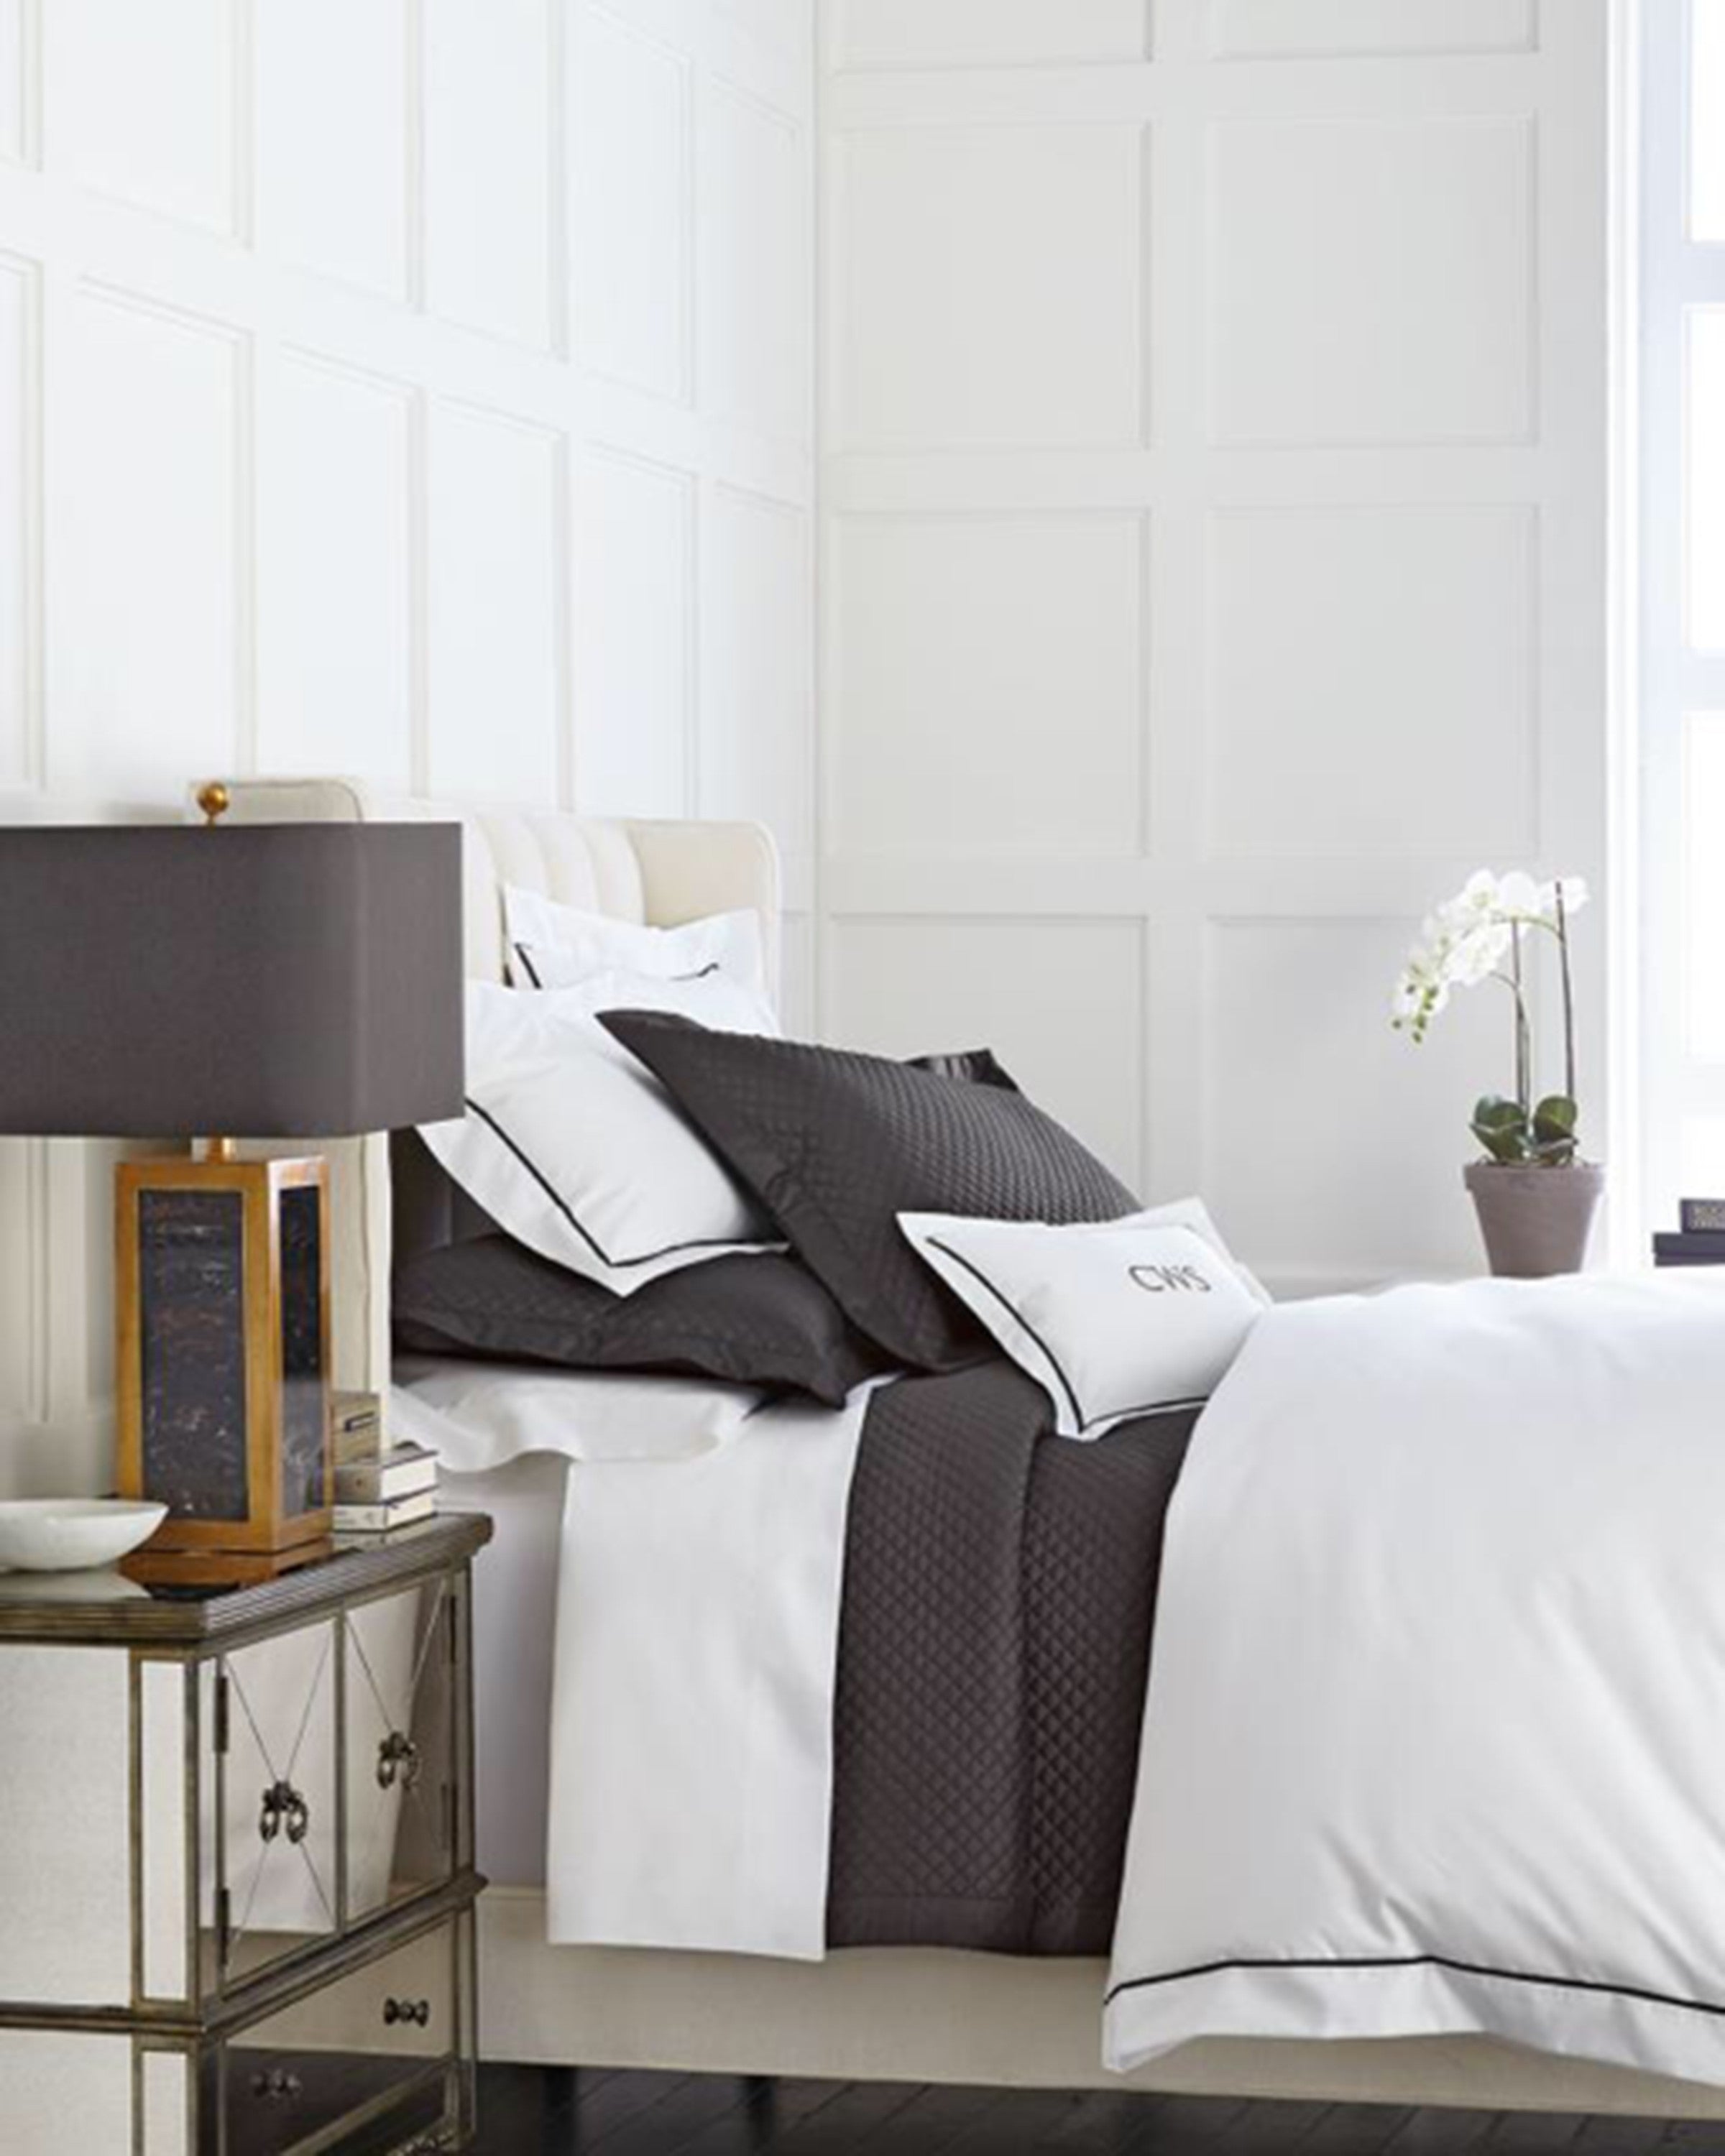 Luxury white and grey bed sets